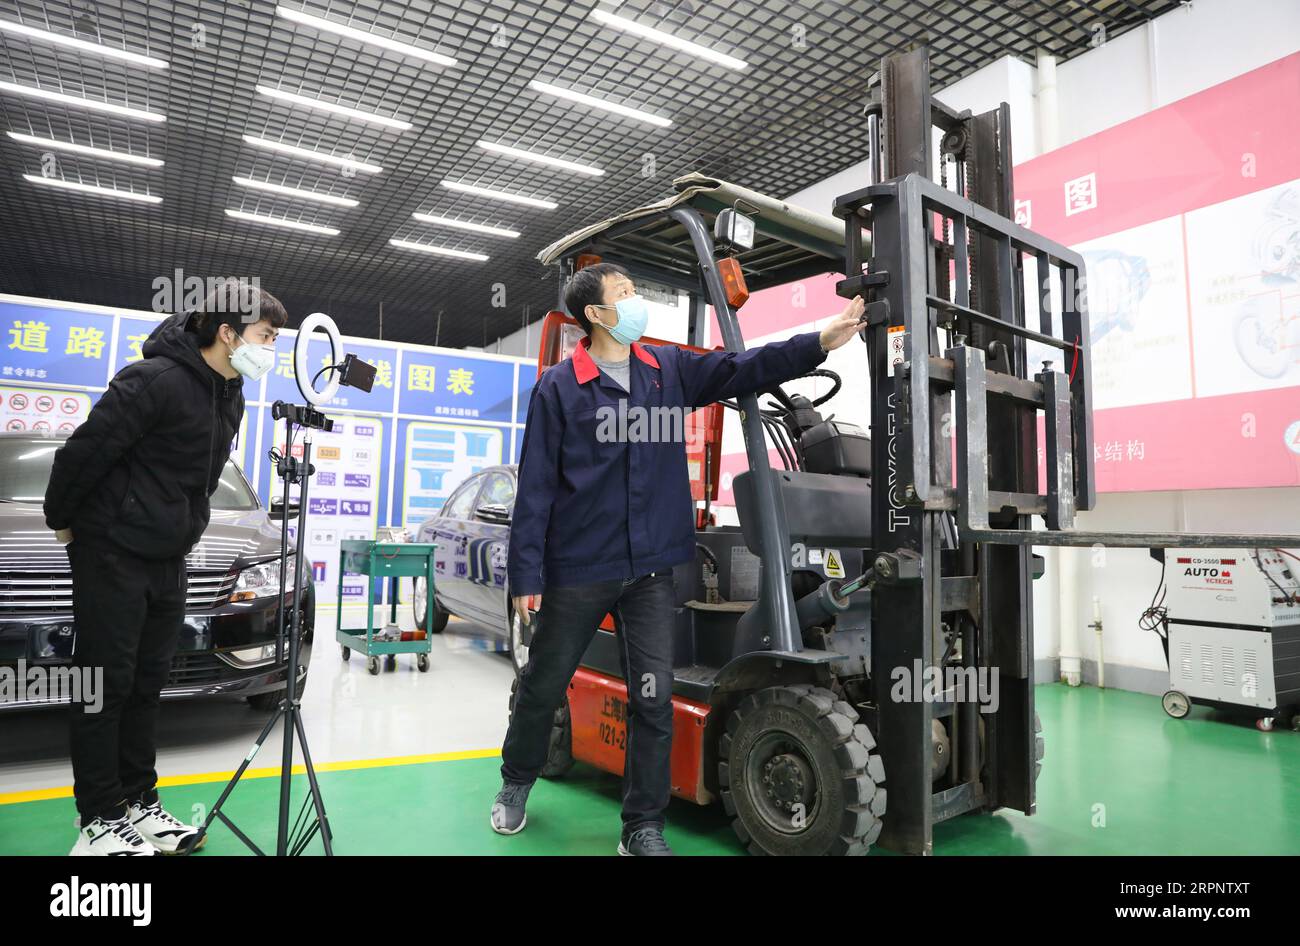 200305 -- ANSHAN, March 5, 2020 -- Teacher Yang Yongxiang R teaches forklift driving via internet at a vocational school in Anshan, northeast China s Liaoning Province, March 4, 2020. Vocational schools here have provided all kinds of classes via internet for over ten thousand students since March 2.  CHINA-LIAONING-VOCATIONAL EDUCATION-ONLINE TUITION CN YaoxJianfeng PUBLICATIONxNOTxINxCHN Stock Photo